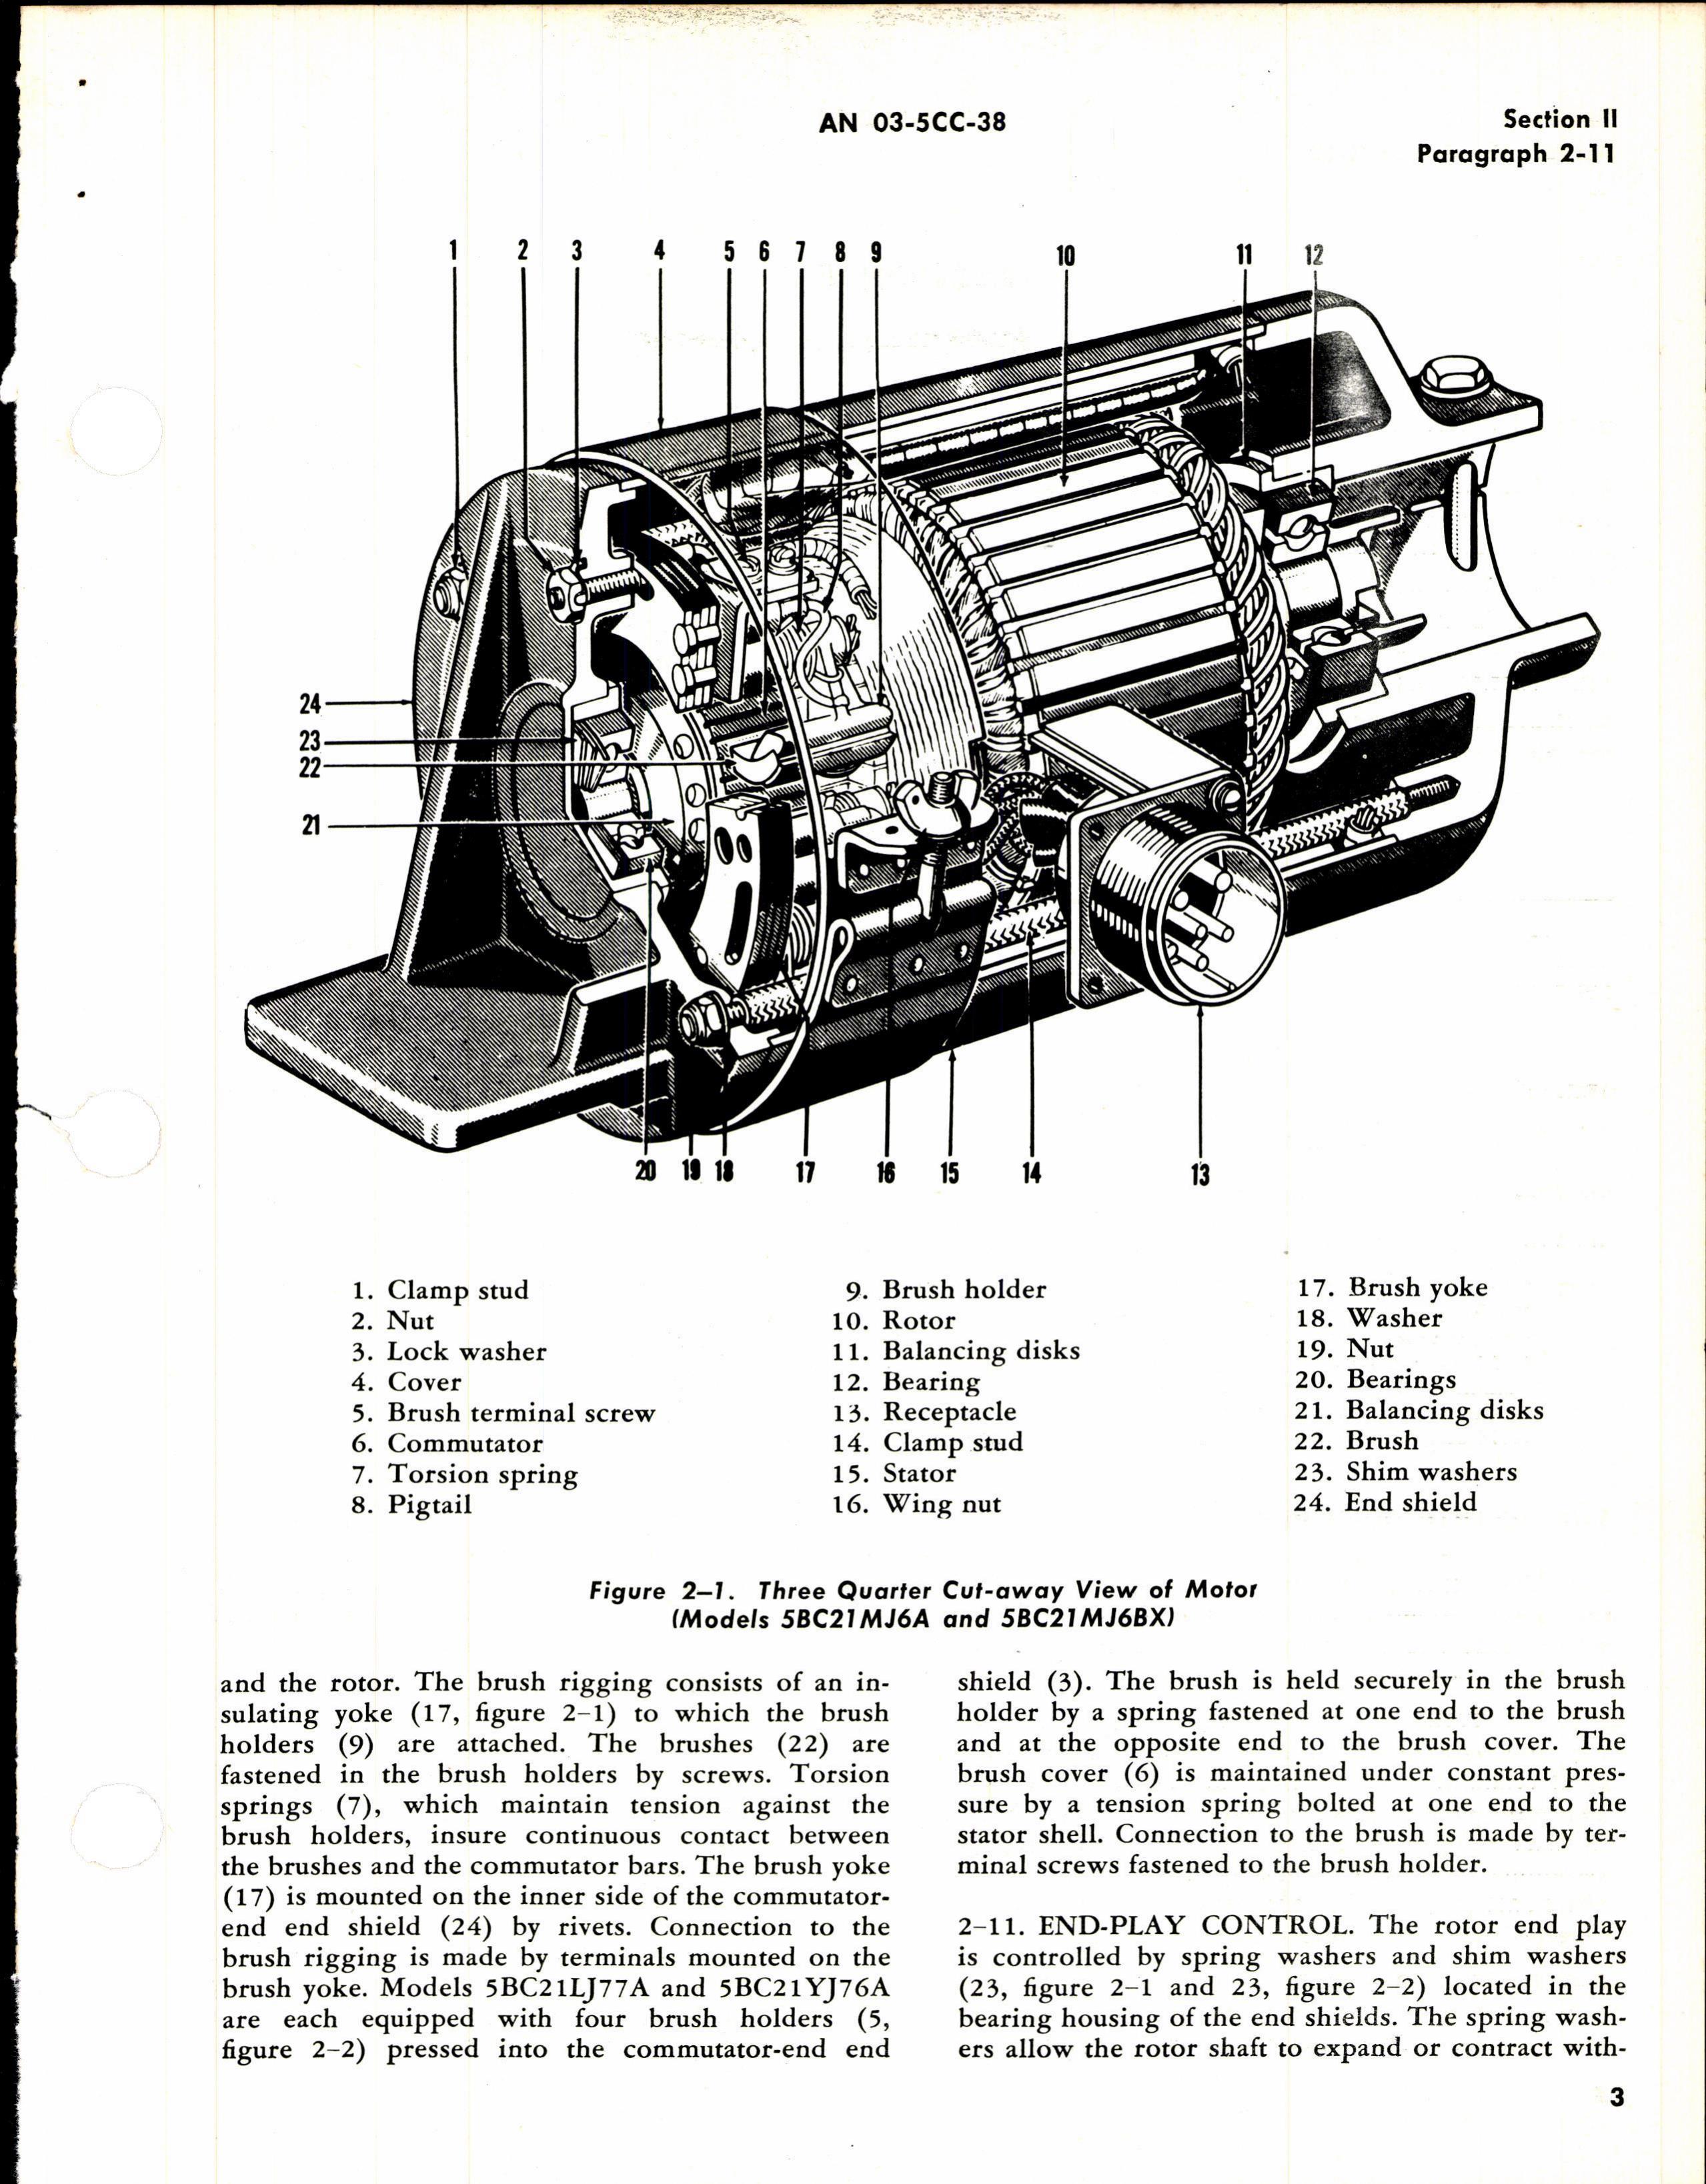 Sample page 7 from AirCorps Library document: Overhaul Instructions for Aircraft Motors Series 5BC21